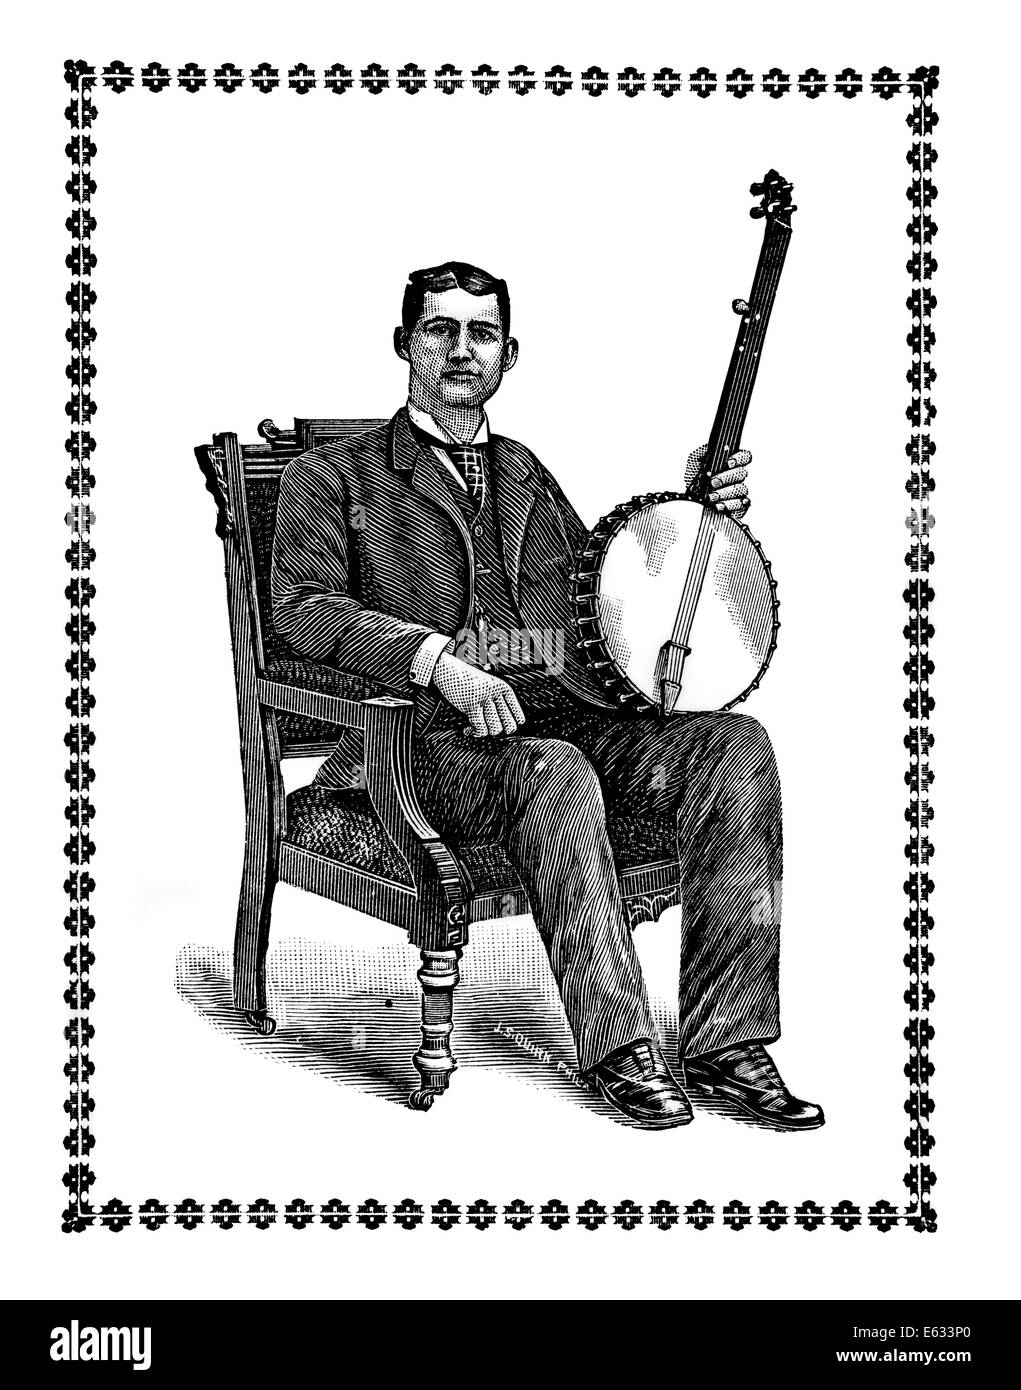 1800s 1890s MAN SITTING IN ORNATE WOODEN ARM CHAIR LOOKING AT CAMERA HOLDING A FIVE STRING BANJO Stock Photo